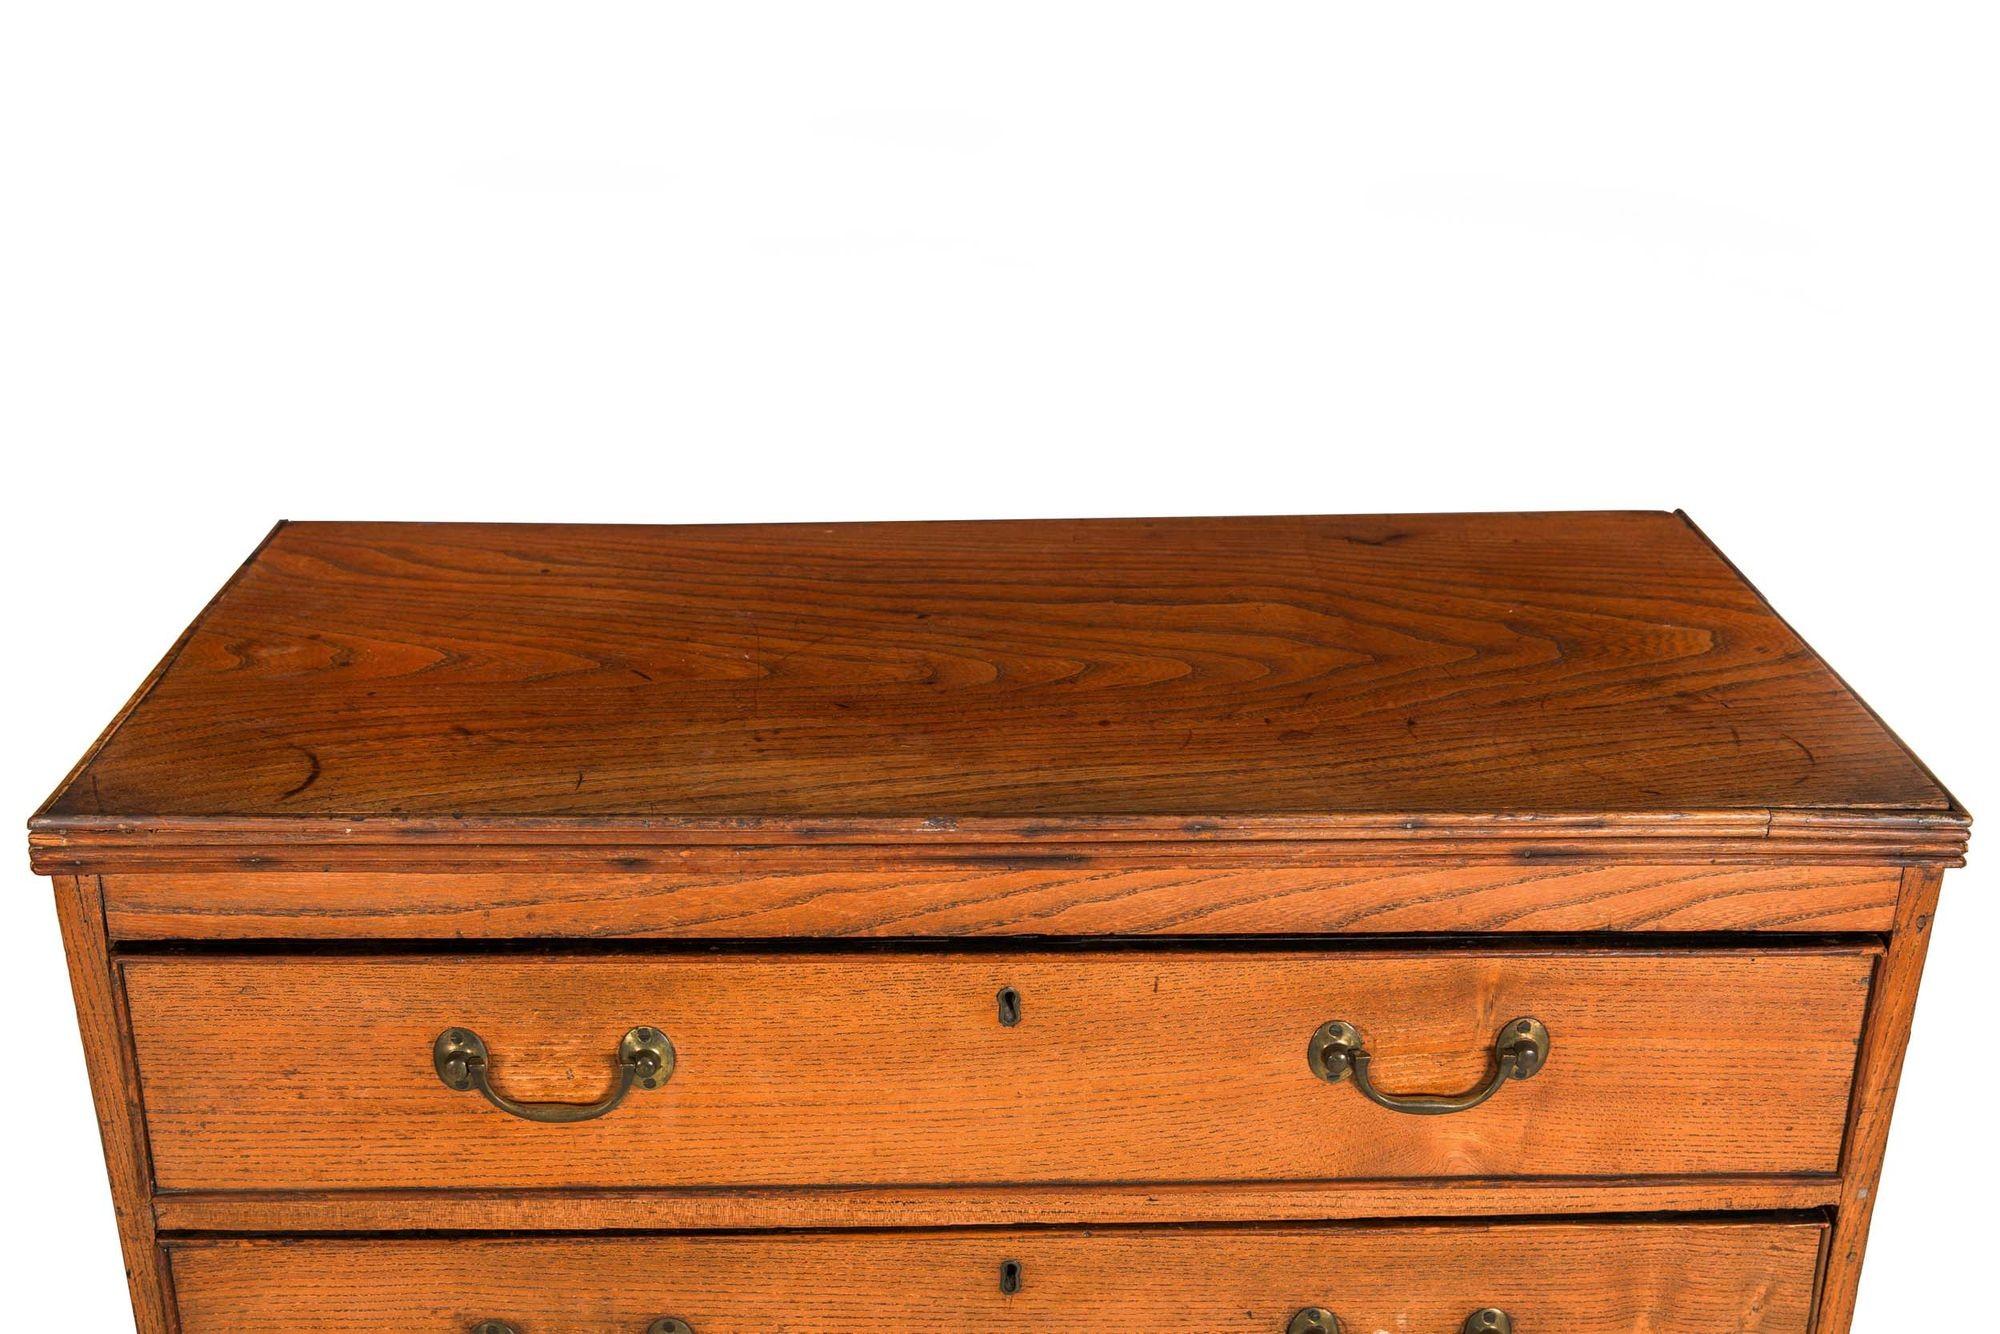 English Antique Patinated Worn Elm Chest of Drawers, Early 19th Century For Sale 1